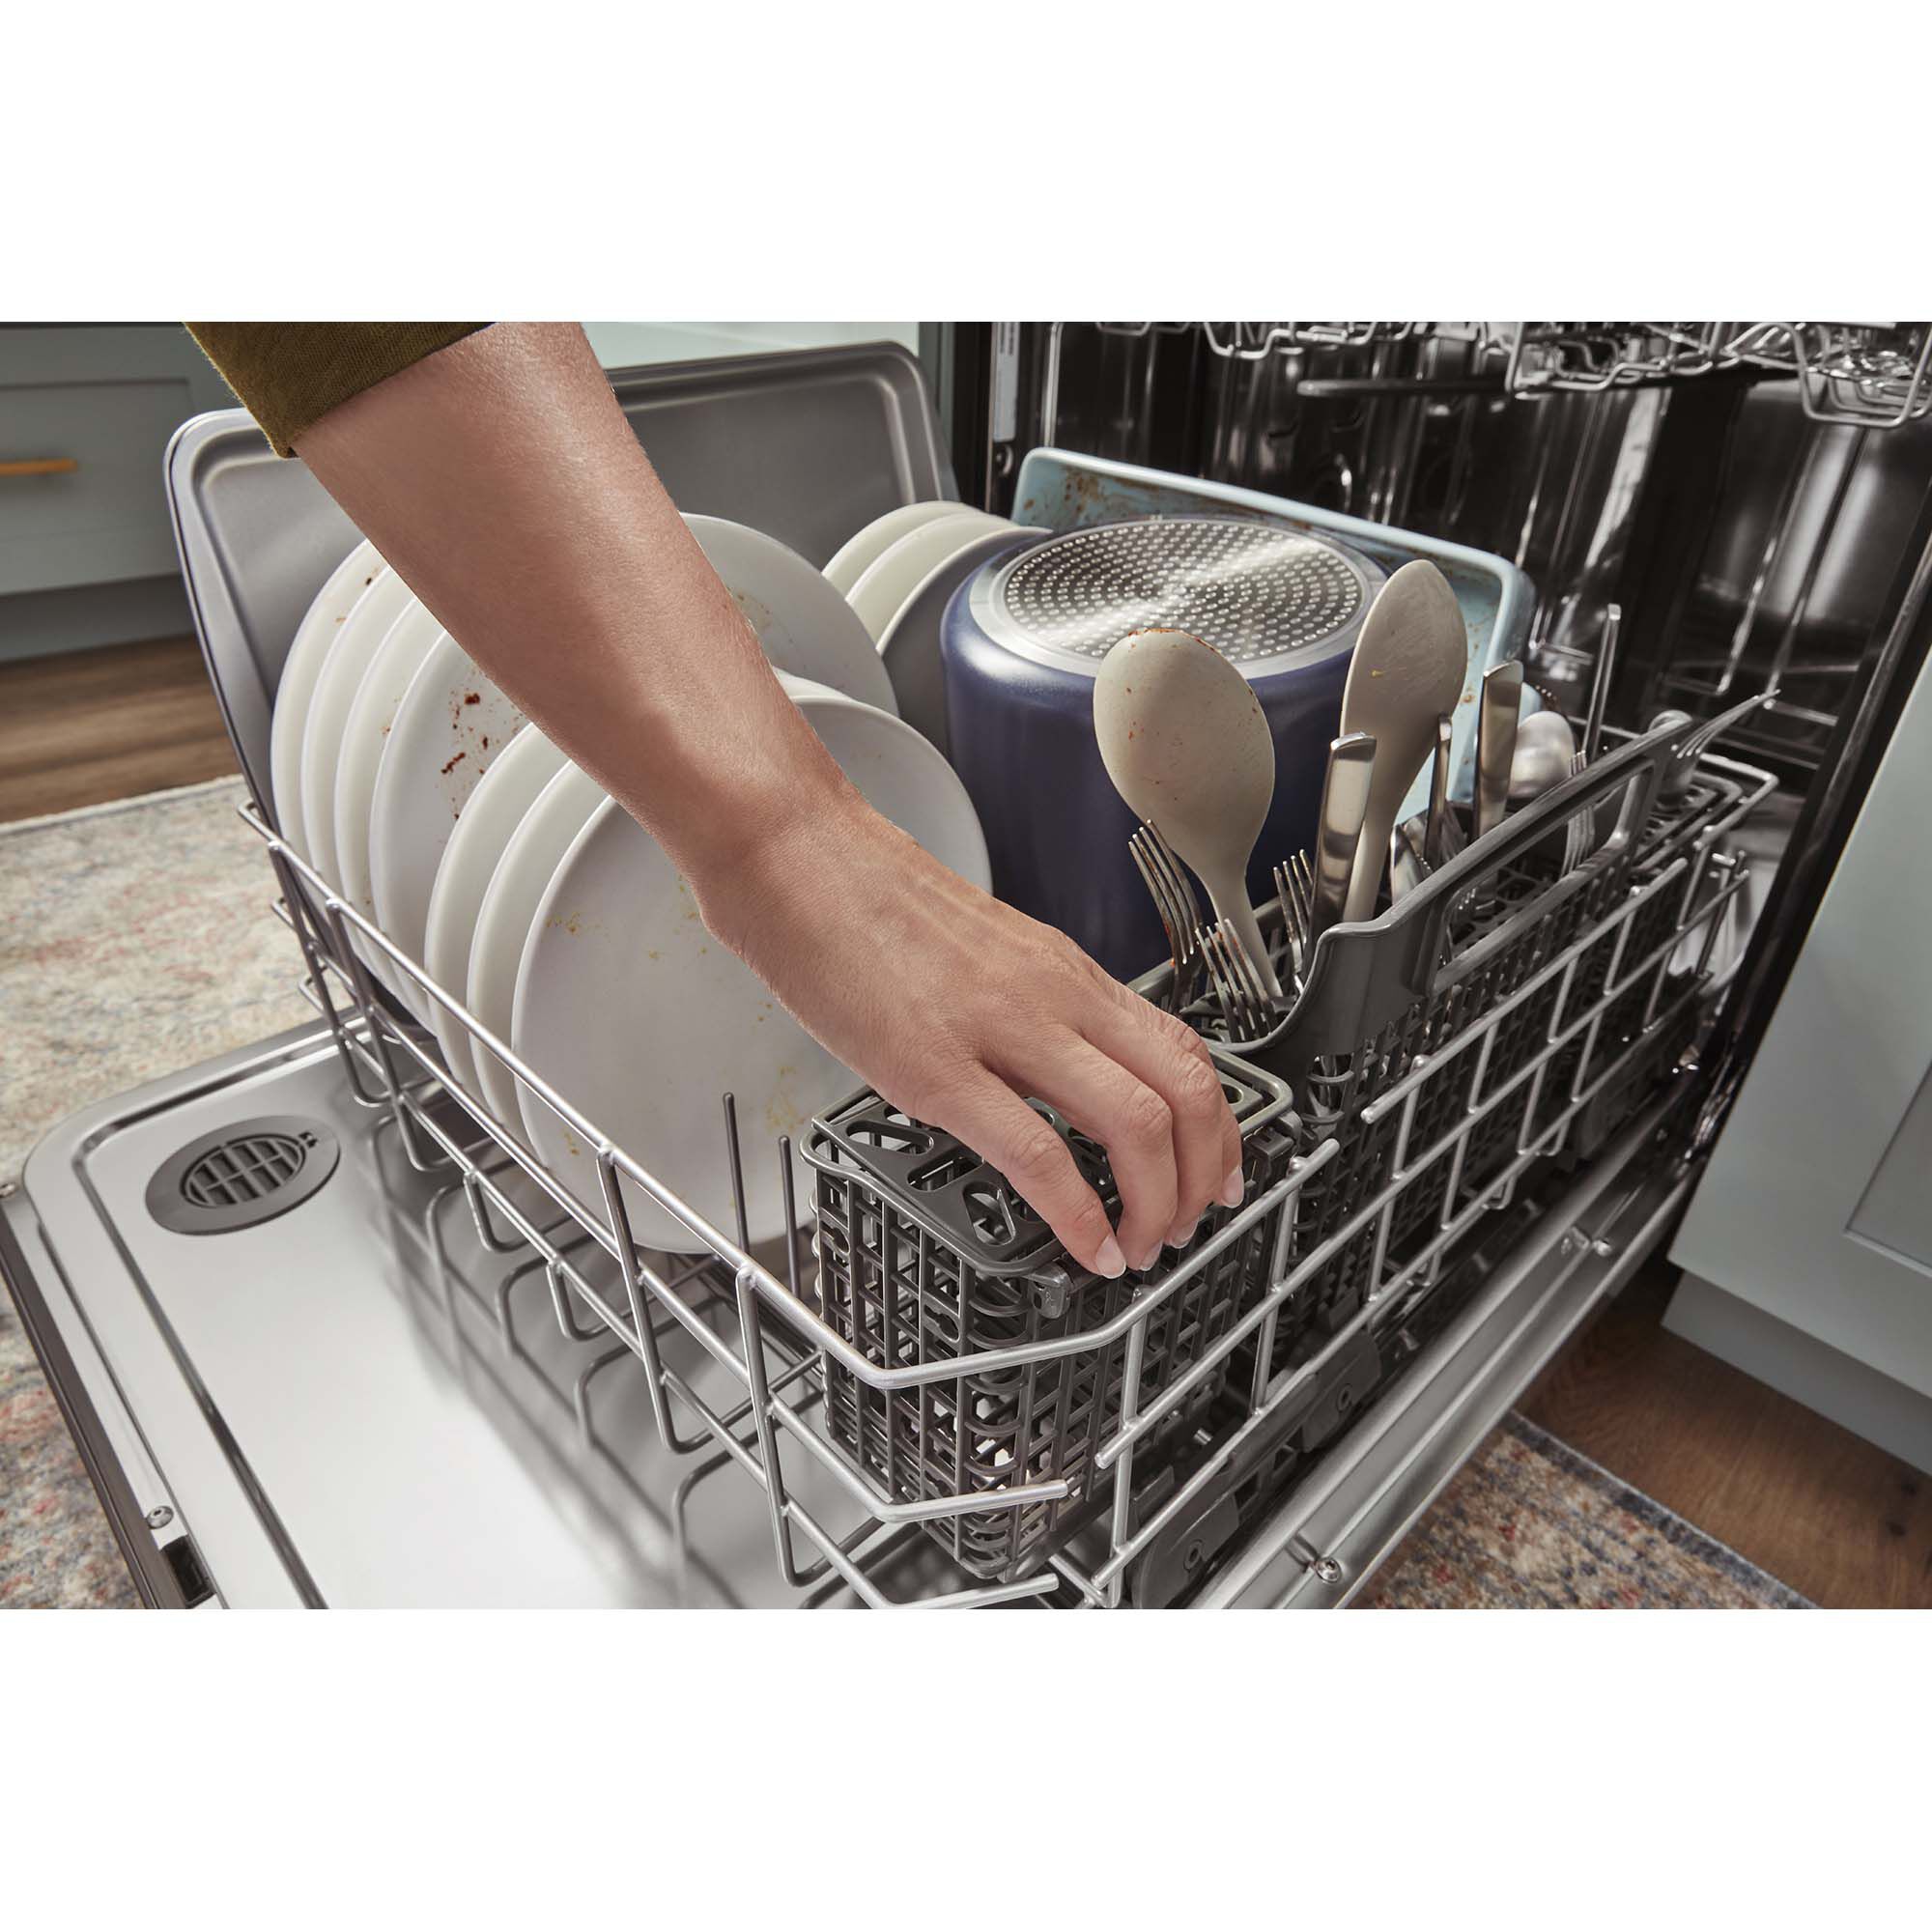 Whirlpool 24 in. Built-In Dishwasher with Top Control, 47 dBA Sound Level,  13 Place Settings, 5 Wash Cycles & Sanitize Cycle - Fingerprint Resistant  